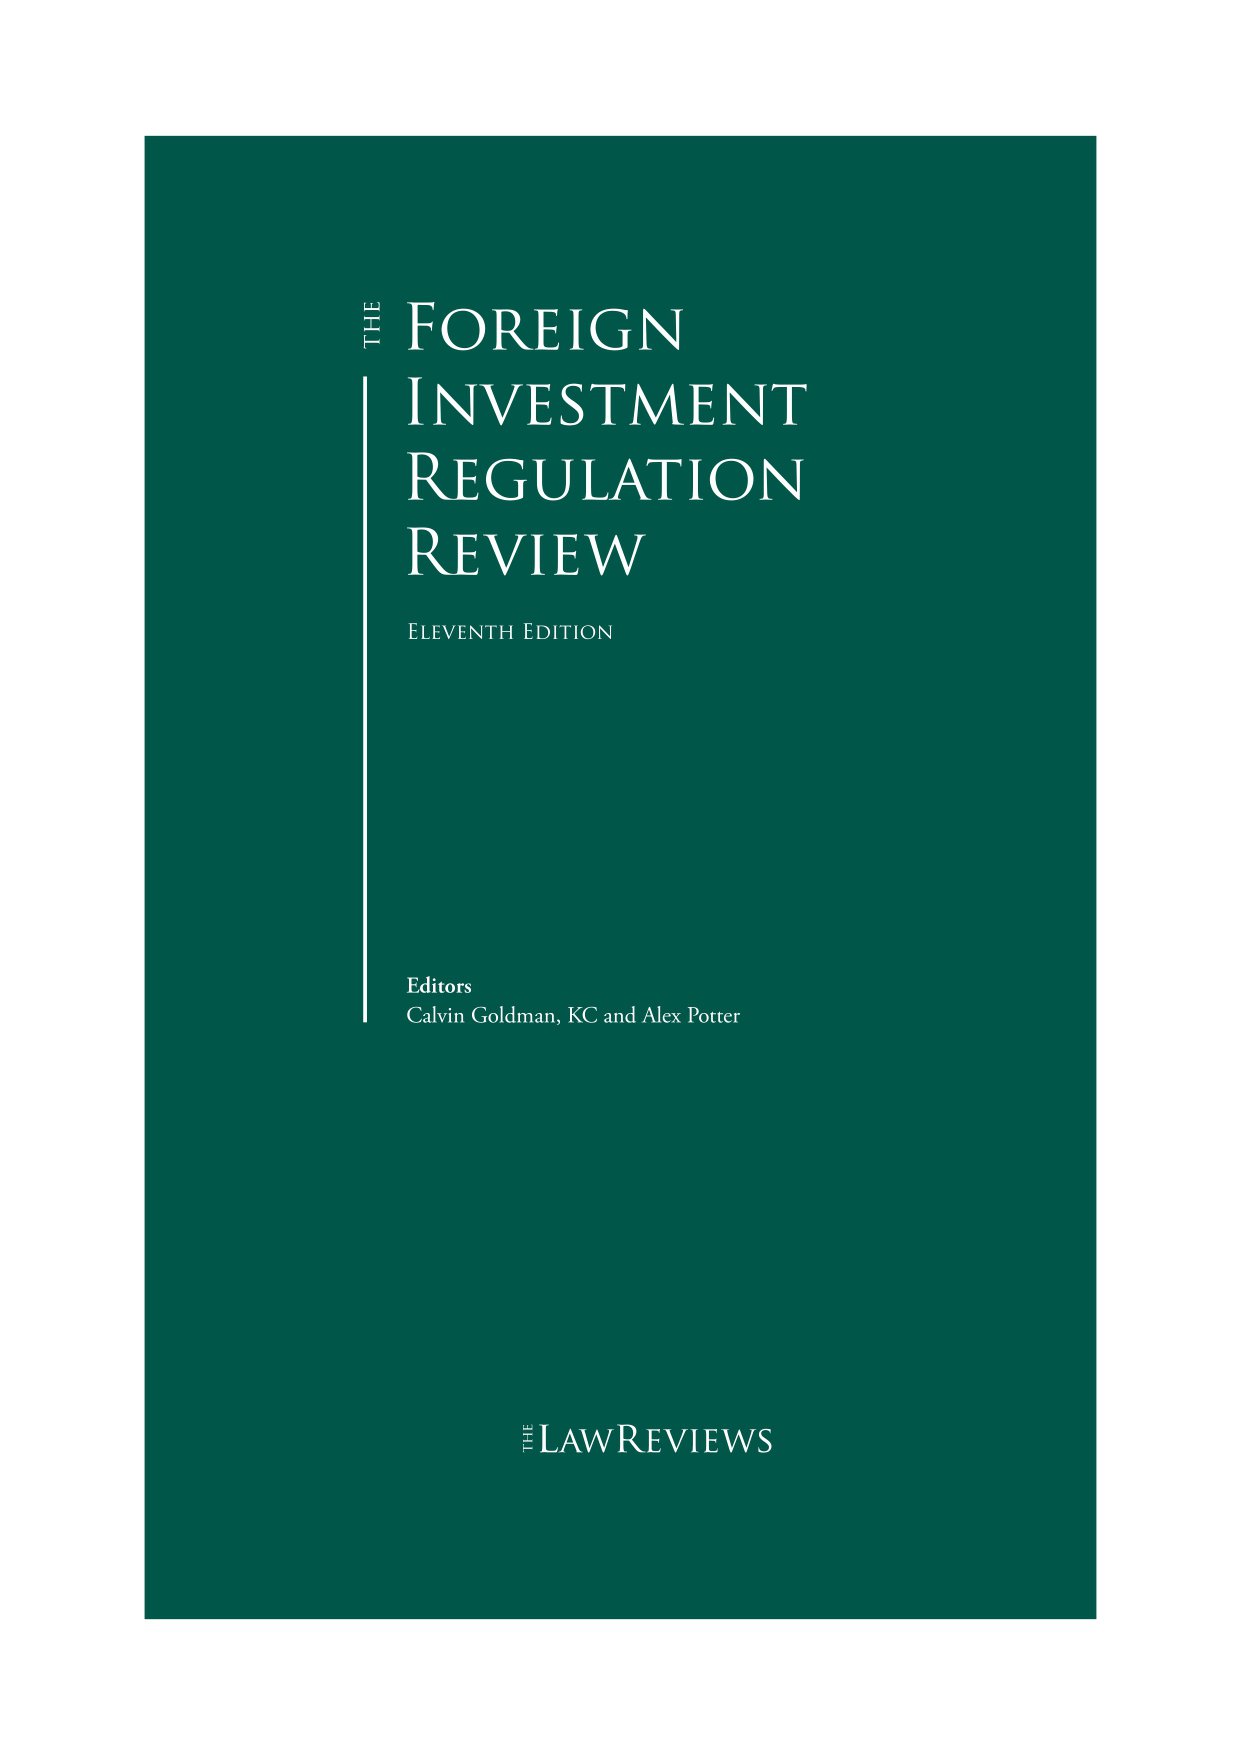 The Foreign Investment Regulation Review